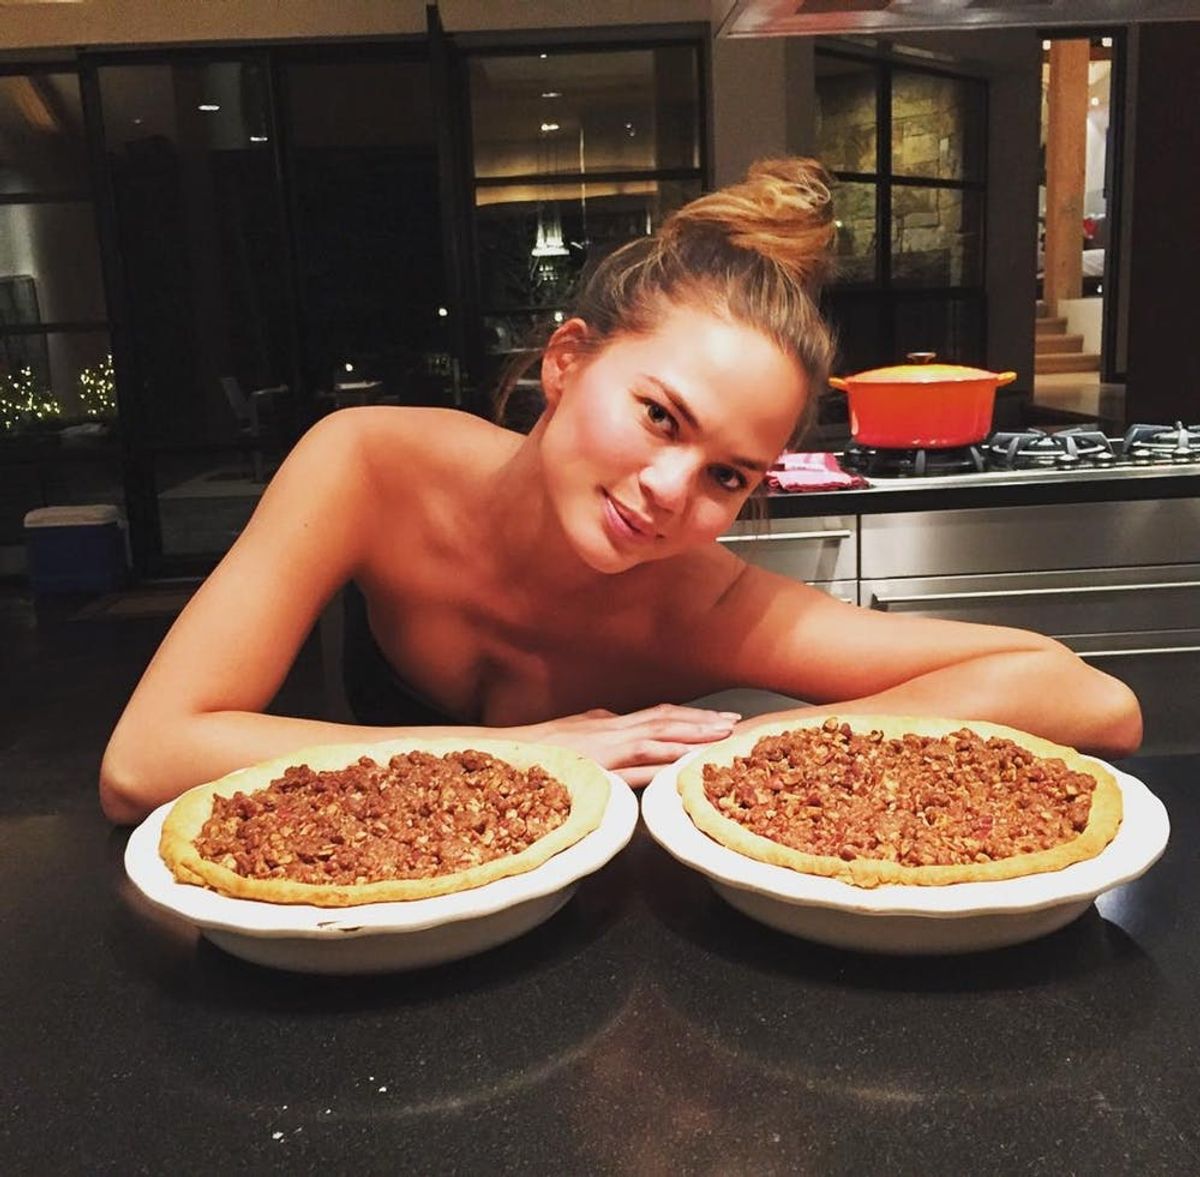 17 Celebrities Whose Thanksgiving Table You’ll Wish You Were At